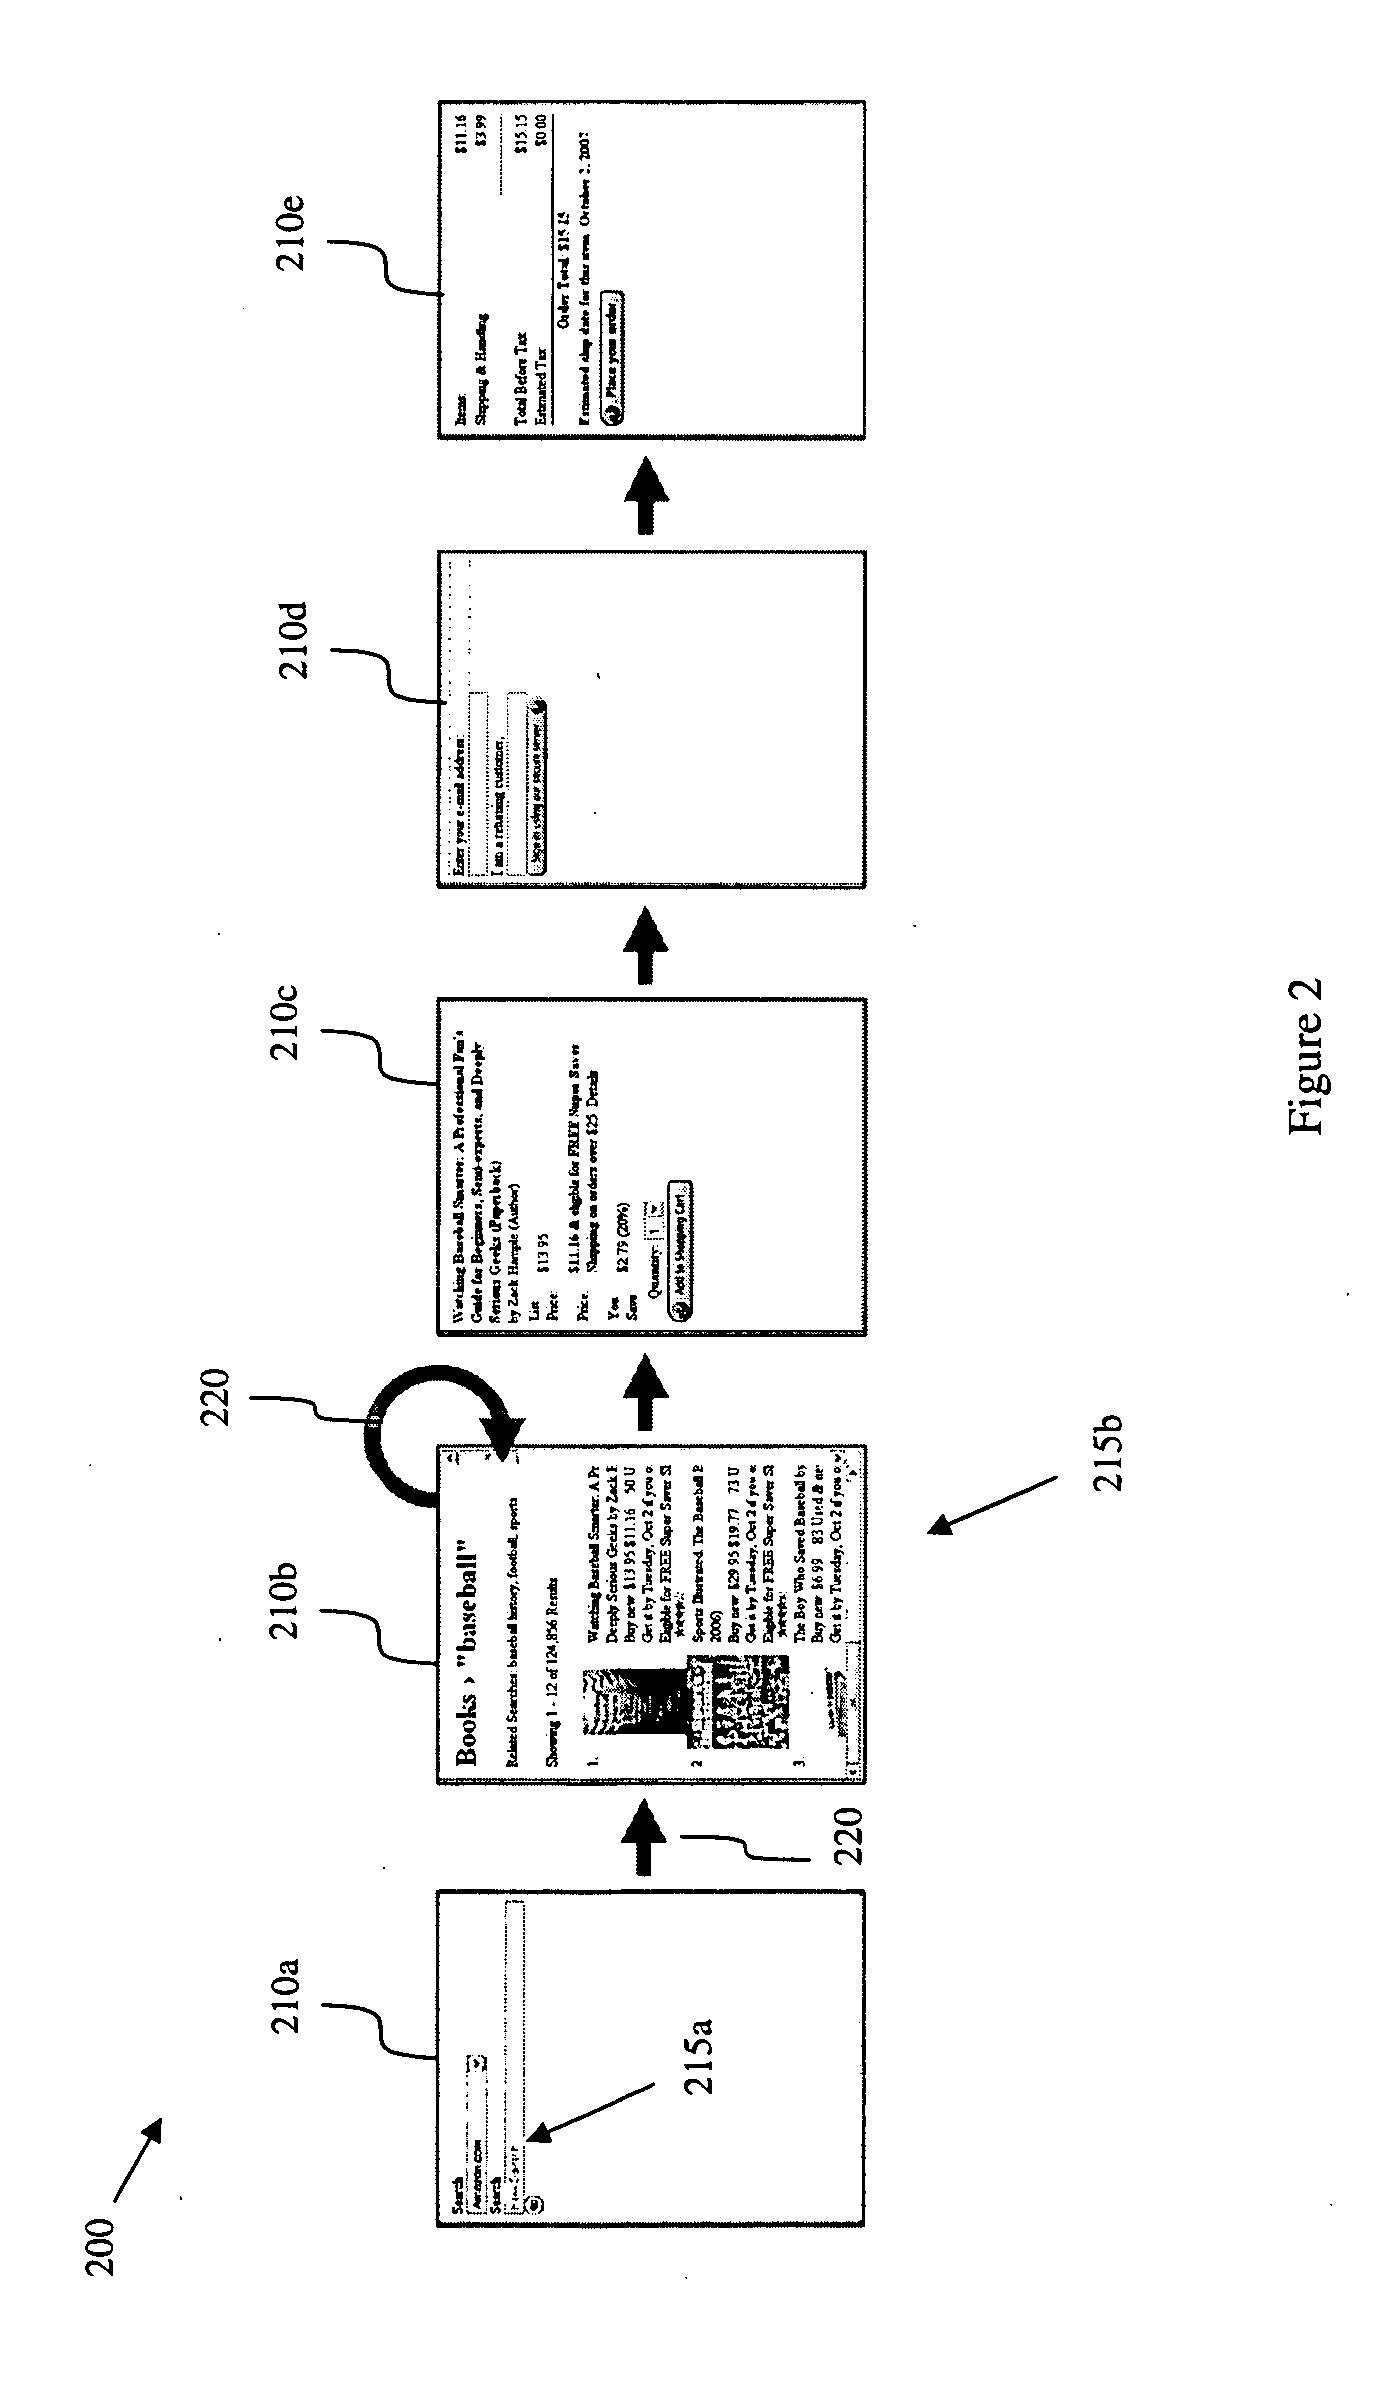 System and Method for Authoring New Lightweight Web Applications Using Application Traces on Existing Websites